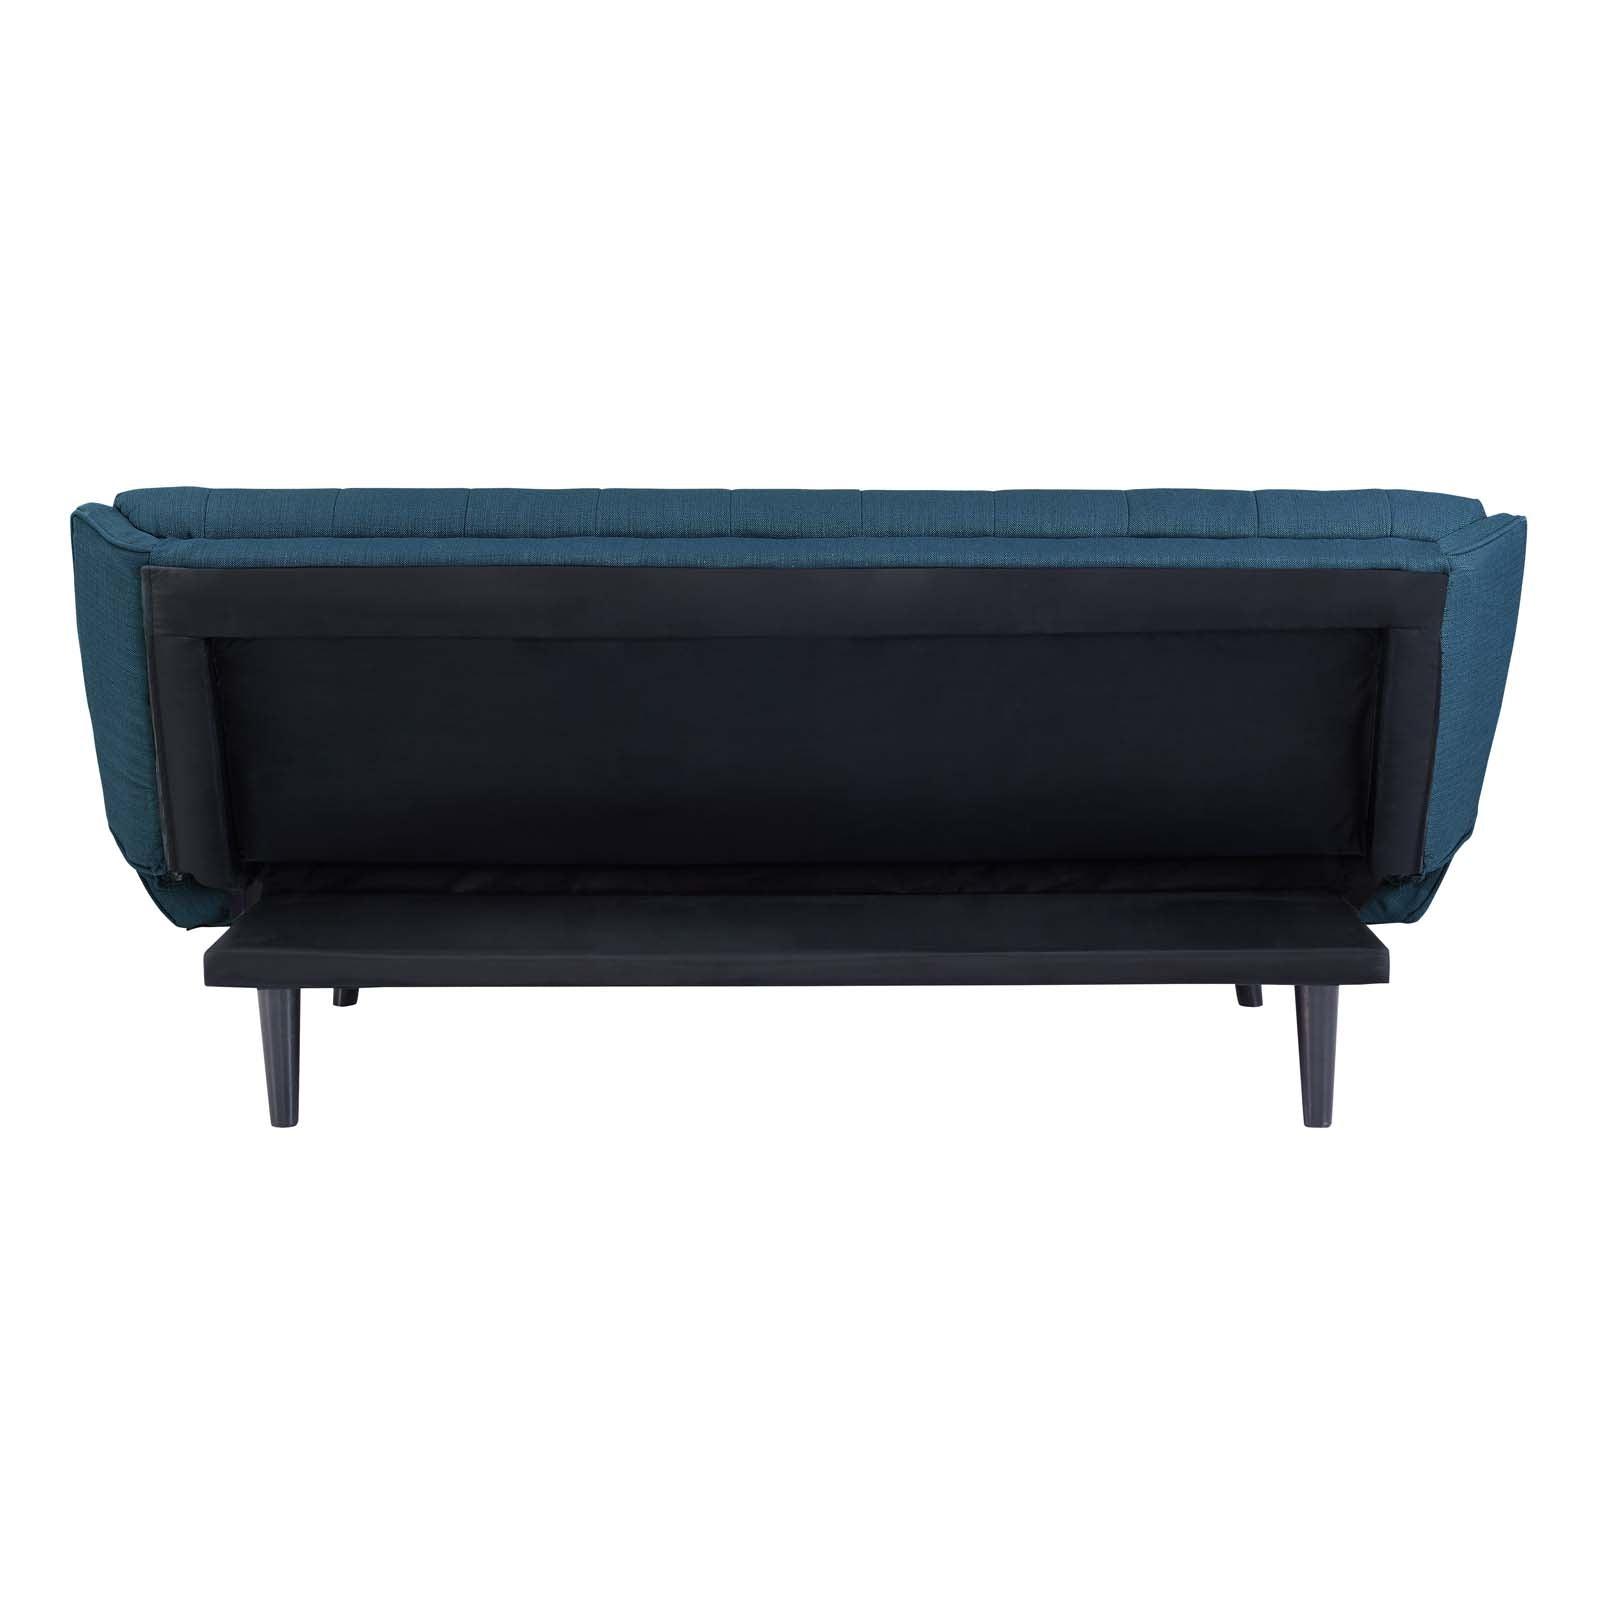 Modway Glance Tufted Convertible Fabric Sofa Bed FredCo